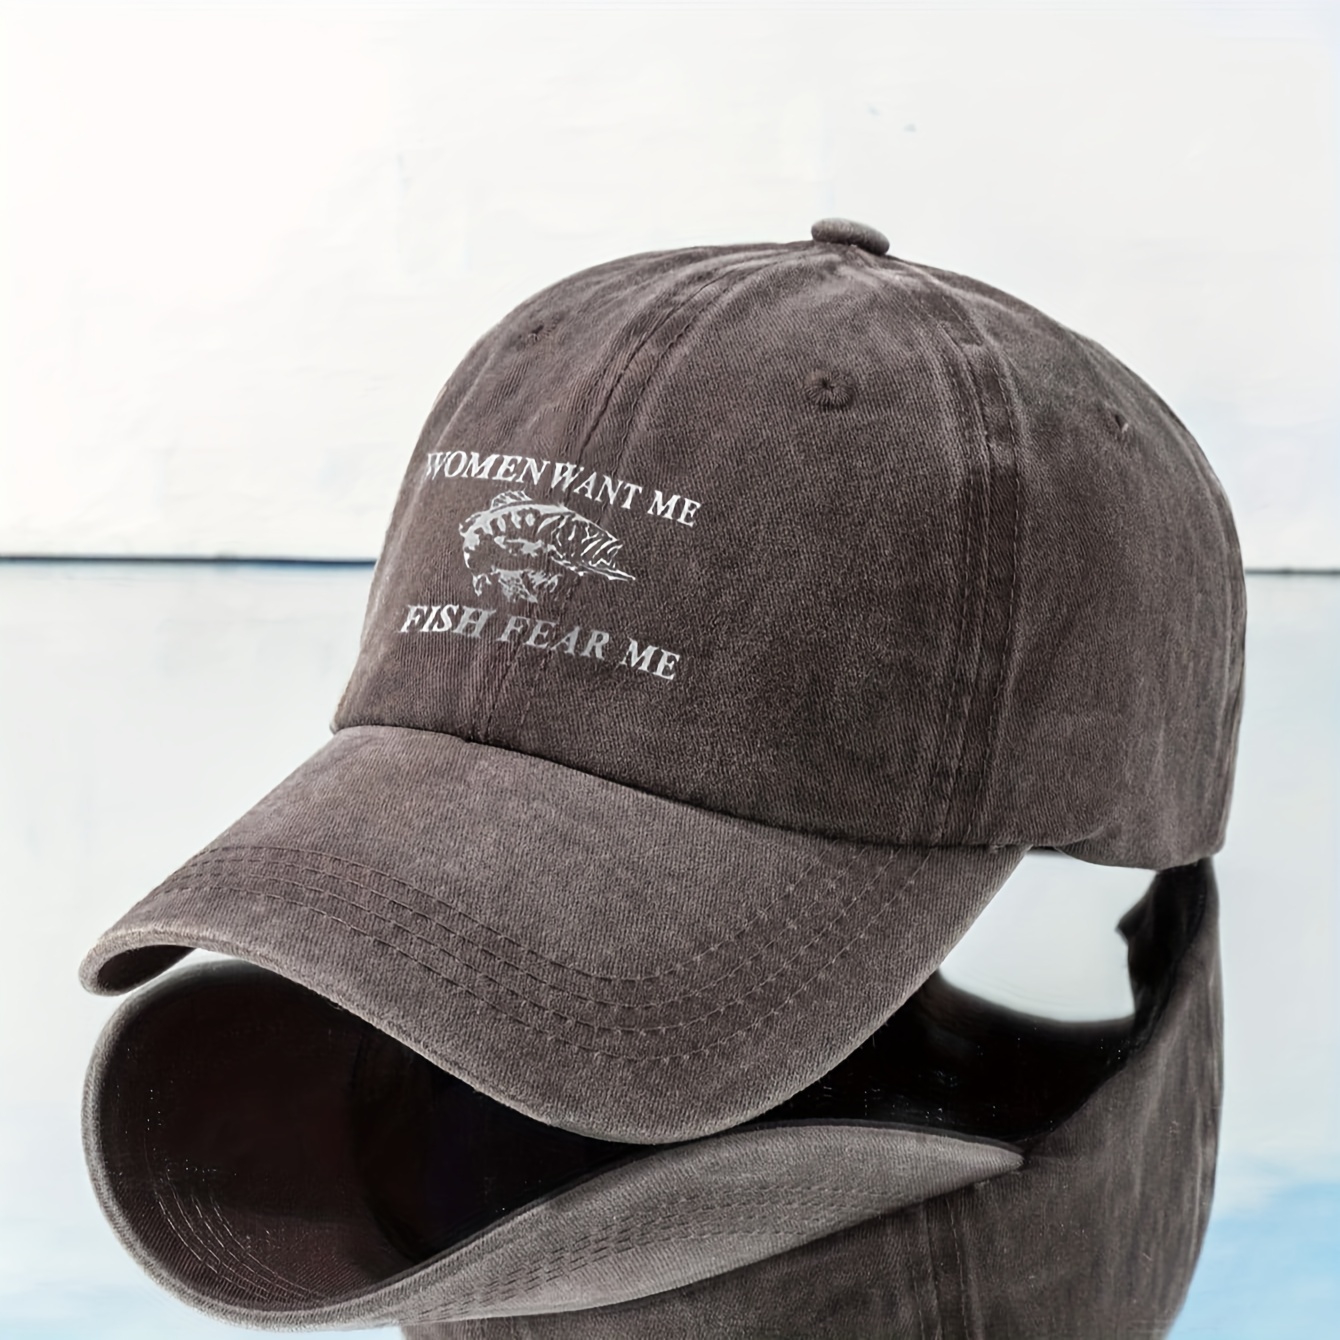 Fish Despise Me Women Tolerate Me Embroidered Classic Baseball Hat Gift for  Fishing Lovers, Fishing Lovers Gift, Funny Dad Hat Cap -  Australia